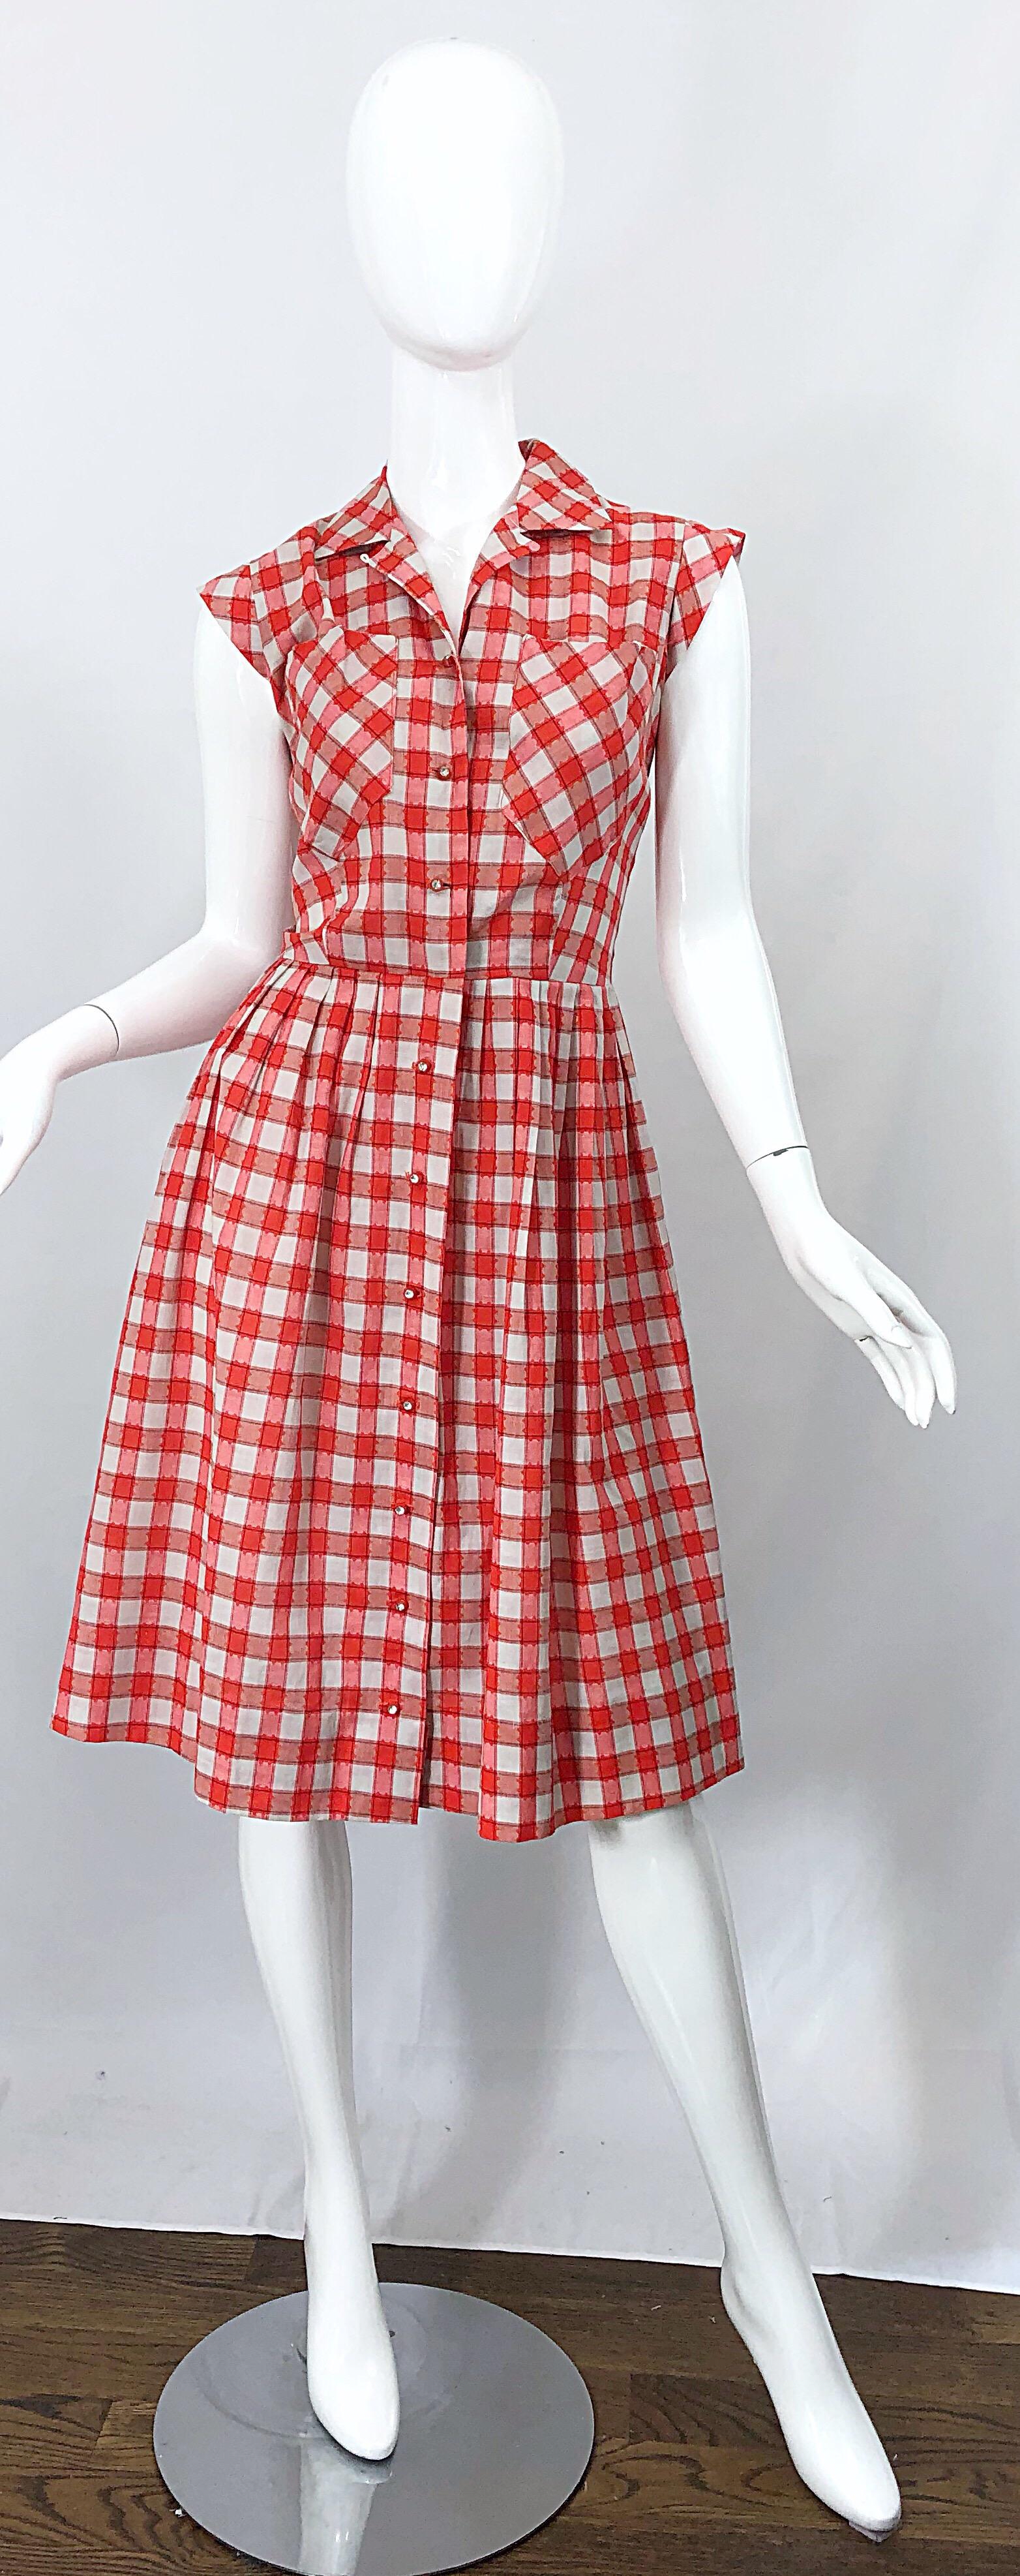 Chic and rare early 1950s cotton dress! Features a fitted bodice with a forgiving full skirt. Rhinestone encrusted buttons up the front, with hidden hook-and-eye closure at left neck. Pocket at each breast. Great belted or alone with wedges, sandals